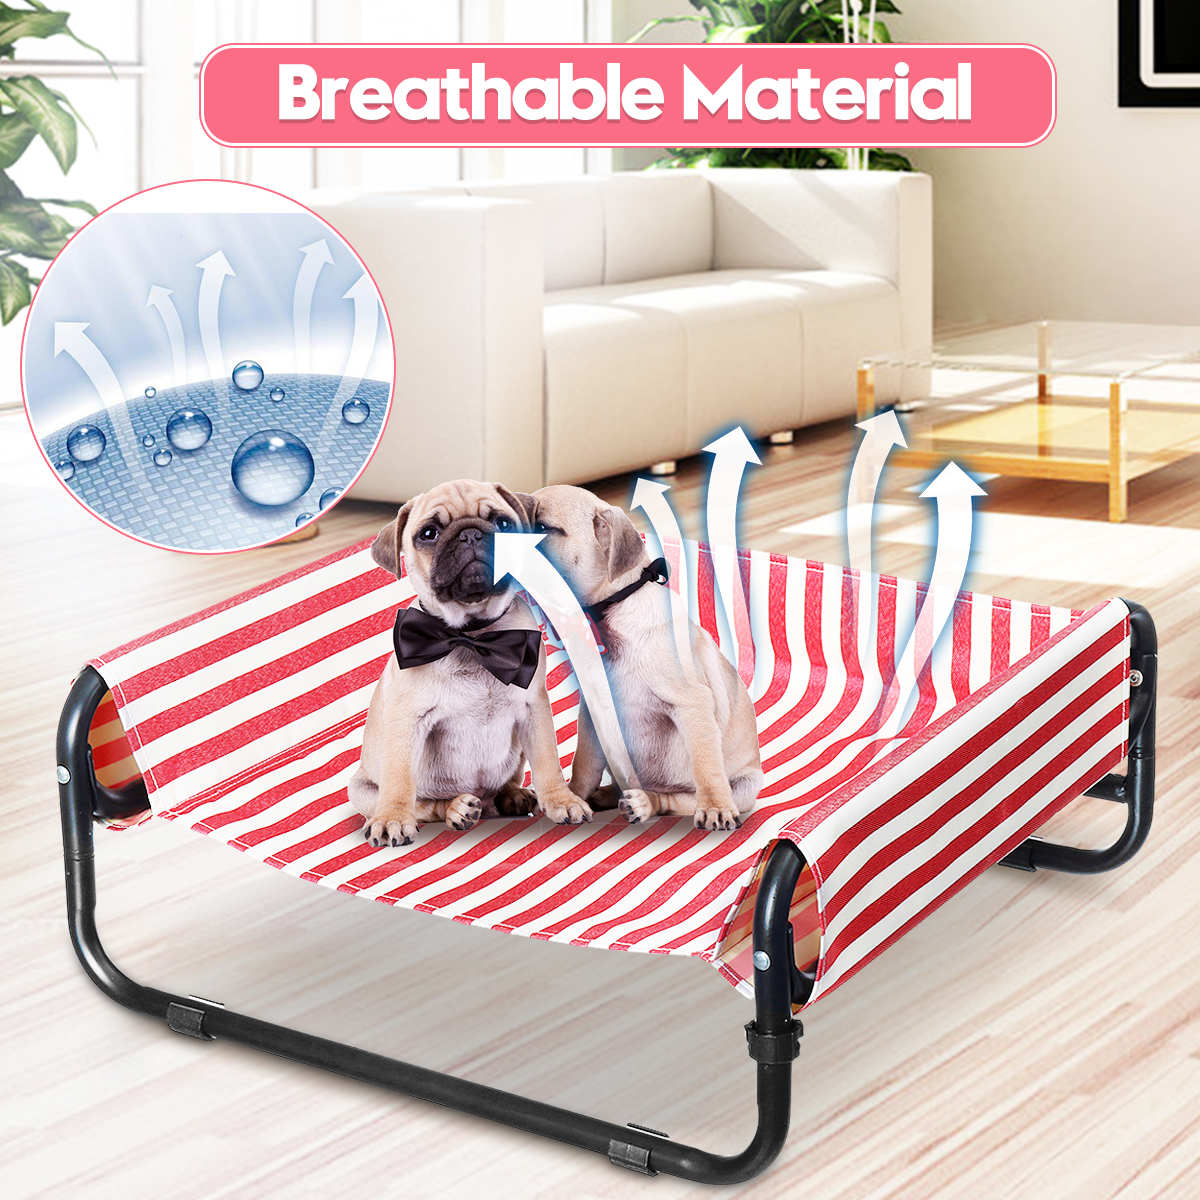 Elevated-Dog-Pet-Bed-Folding-Portable-Waterproof-Outdoor-Raised-Camping-Basket-1631385-1